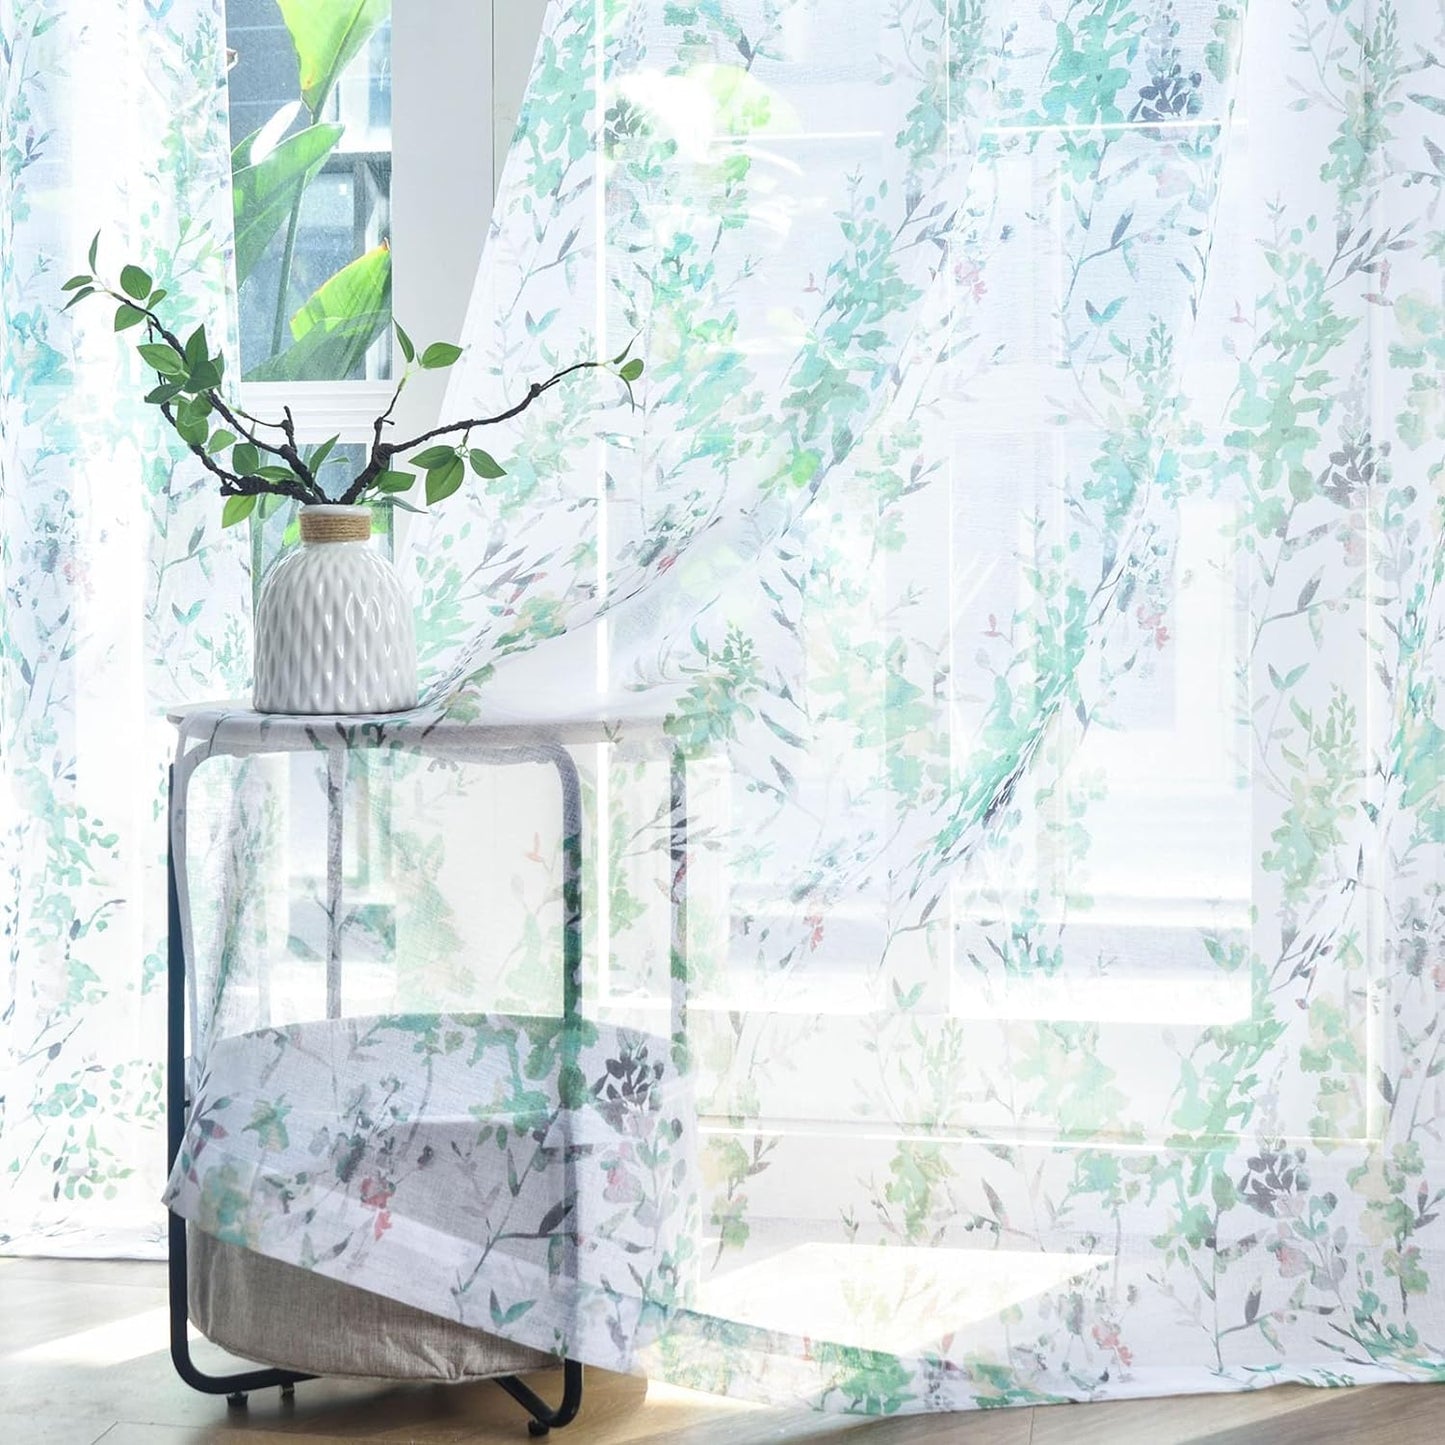 Kotile Grey White Sheer Curtains, Classic Vintage Branch Leaf Printed Sheer Curtains 63 Inch Length 2 Panels Set, Privacy Rod Pocket Sheer Window Floral Curtains, 50 X 63 Inch, Grey  Kotile Textile Green W50 X L96 Inch 